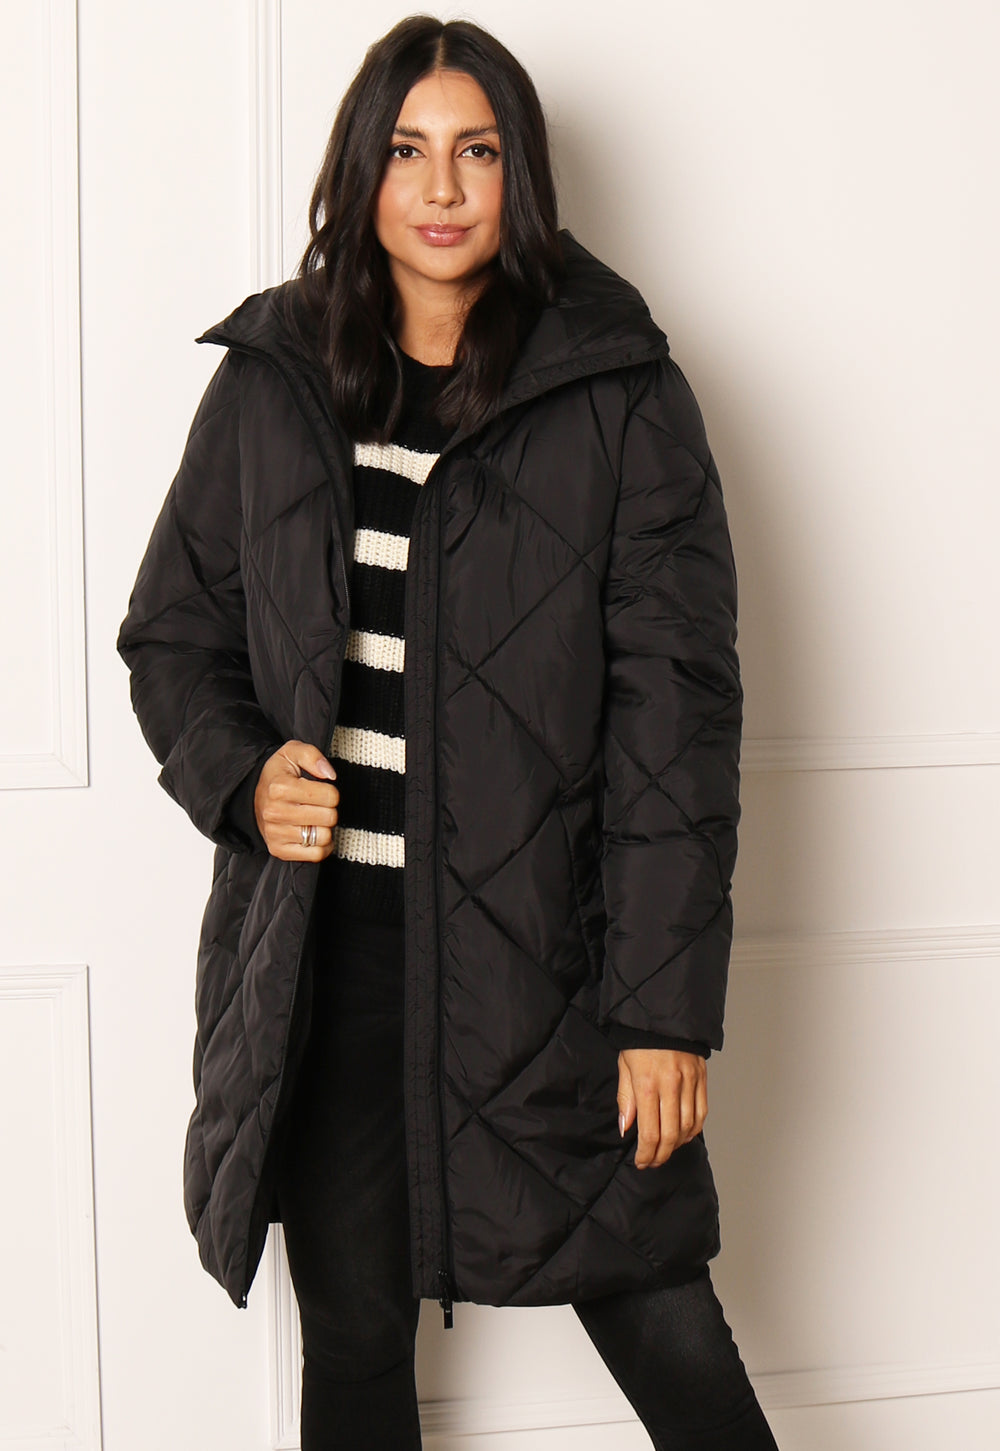 VILA Adaya Diamond Quilted Longline Puffer Coat with Funnel Neck in Black - One Nation Clothing